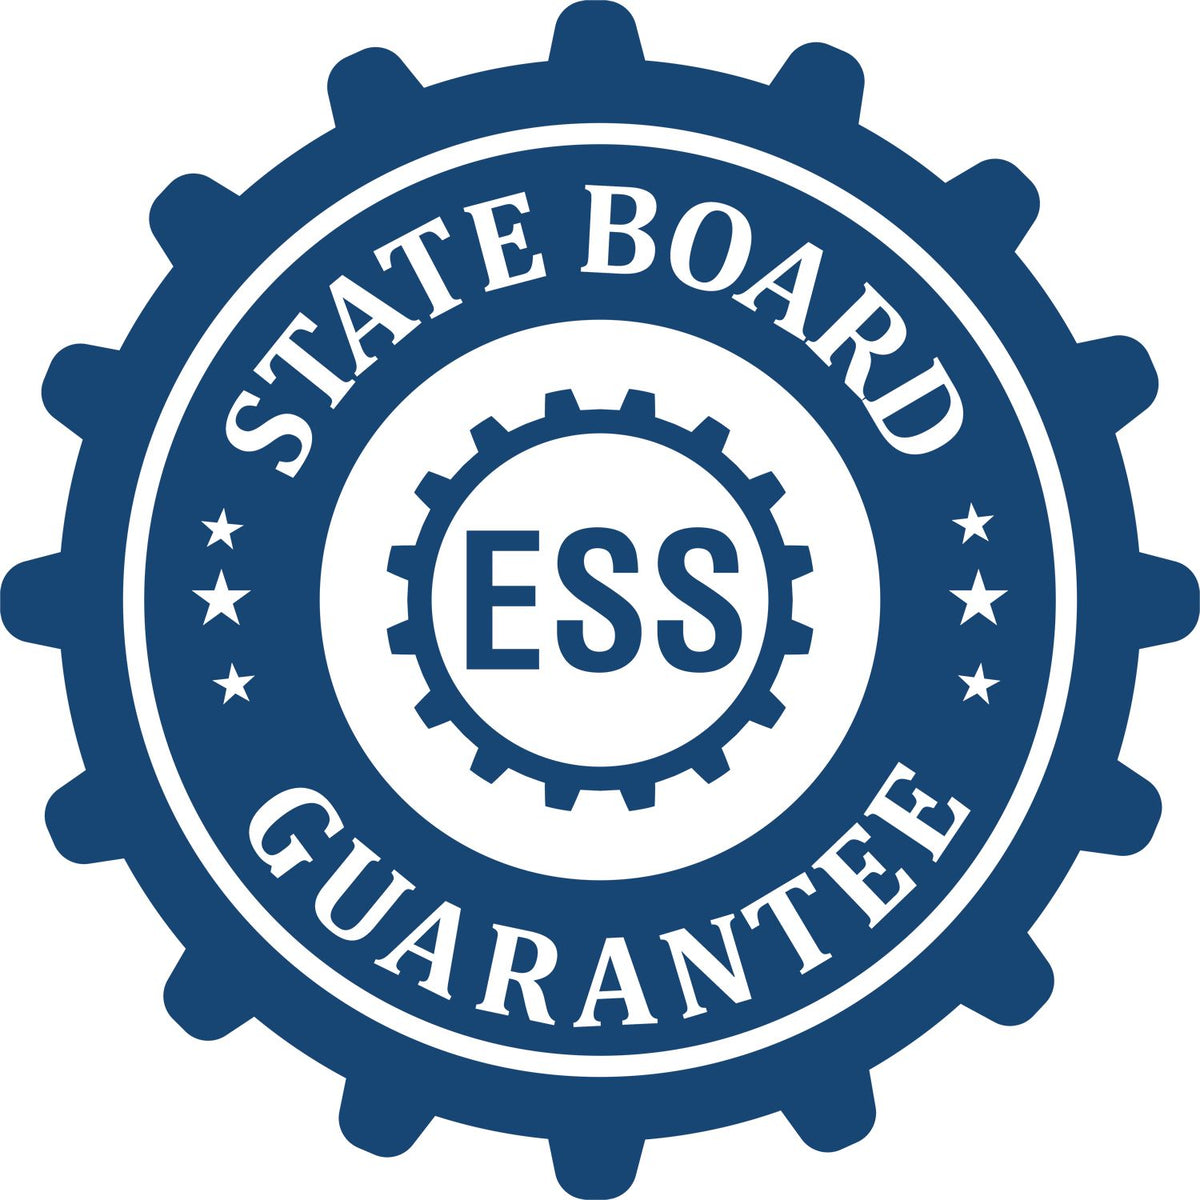 An emblem in a gear shape illustrating a state board guarantee for the State of Delaware Long Reach Architectural Embossing Seal product.